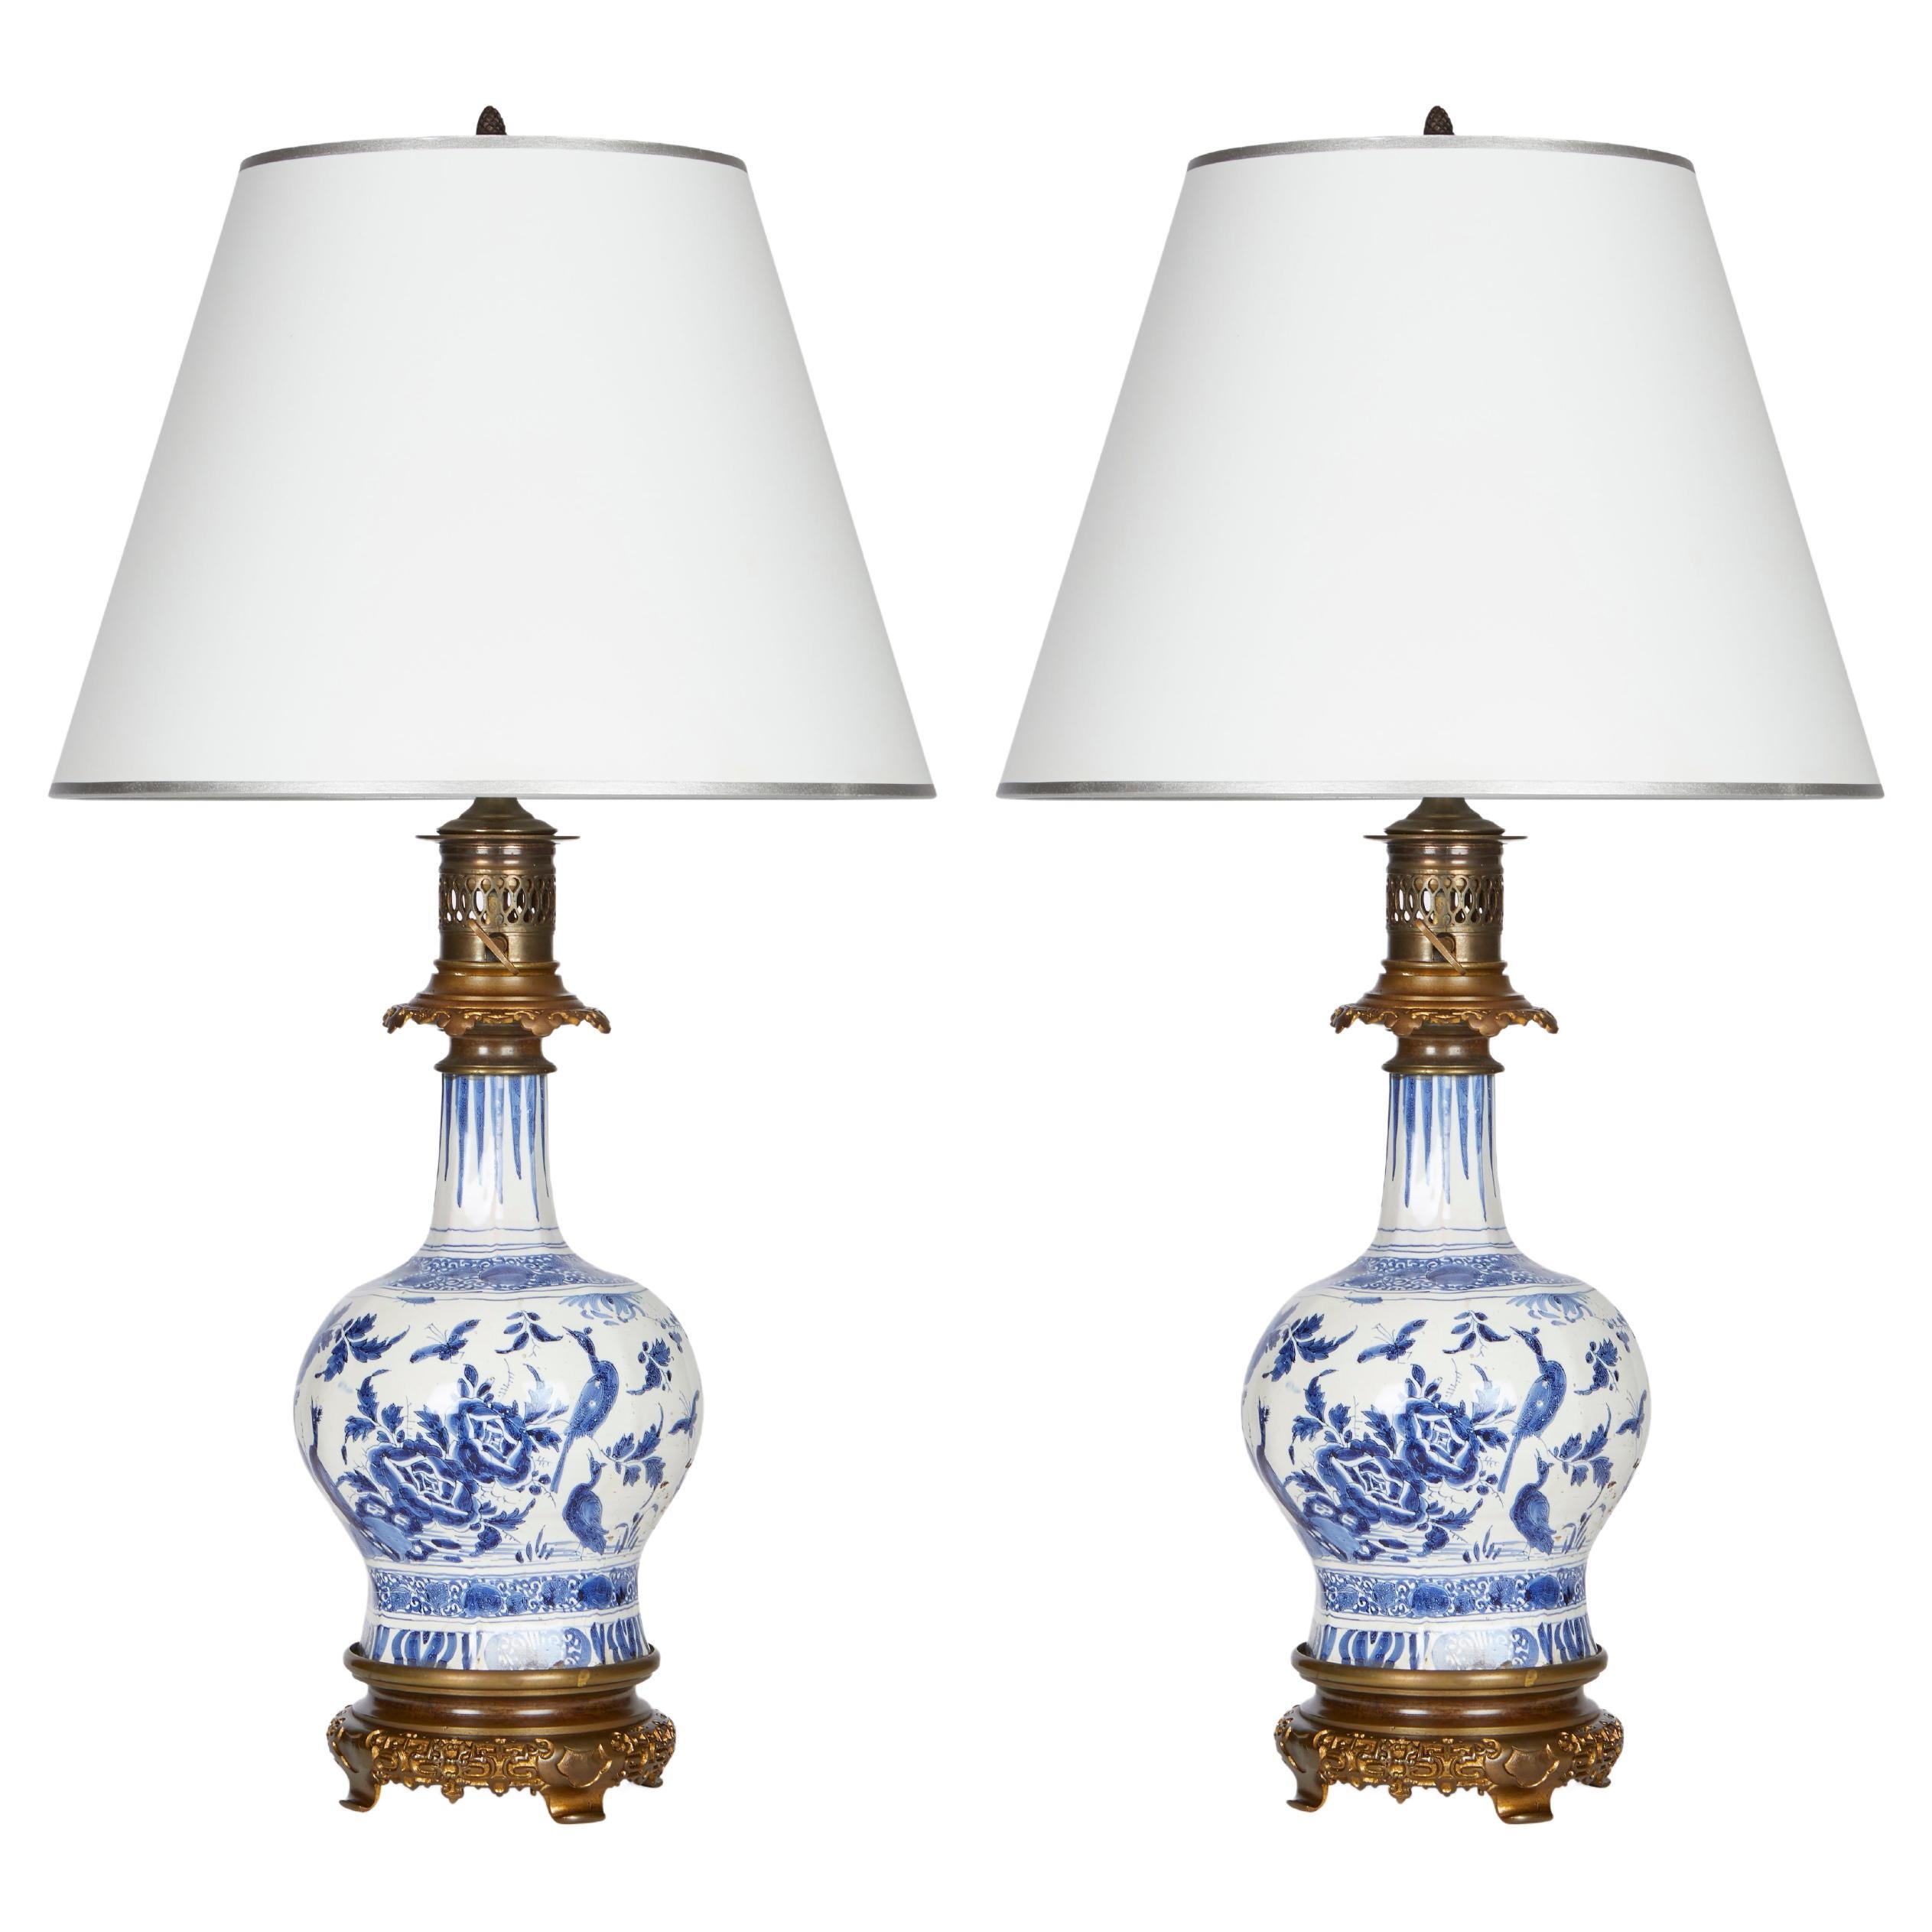 Pair of Dutch White and Blue Delft Table Lamp